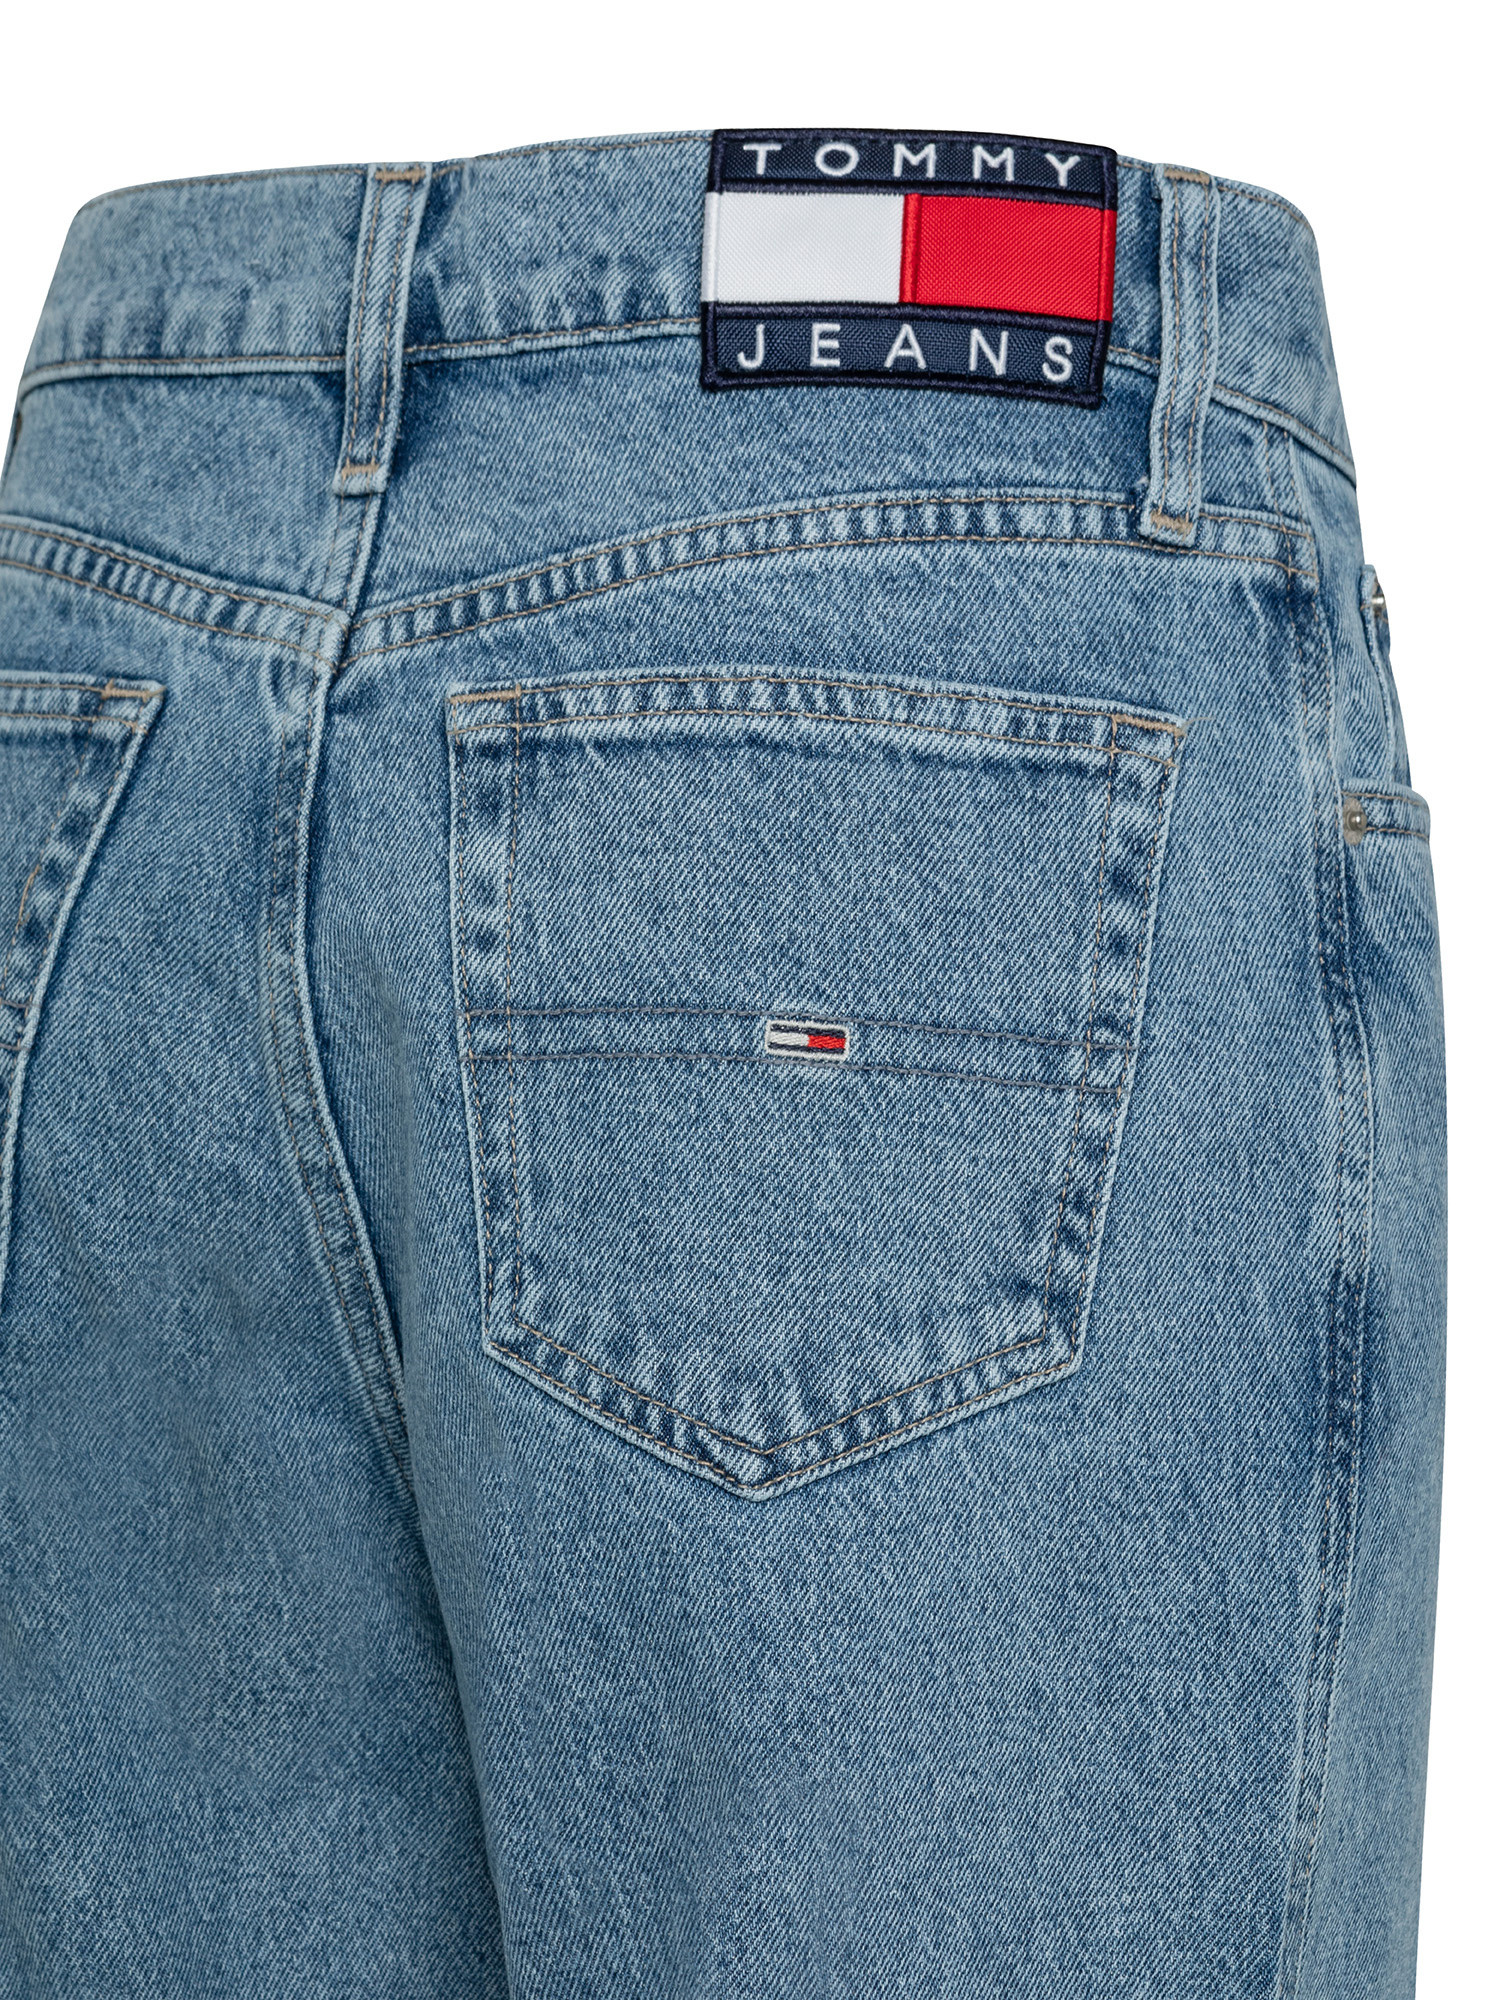 Tommy Jeans - High-waisted jeans, Denim, large image number 2